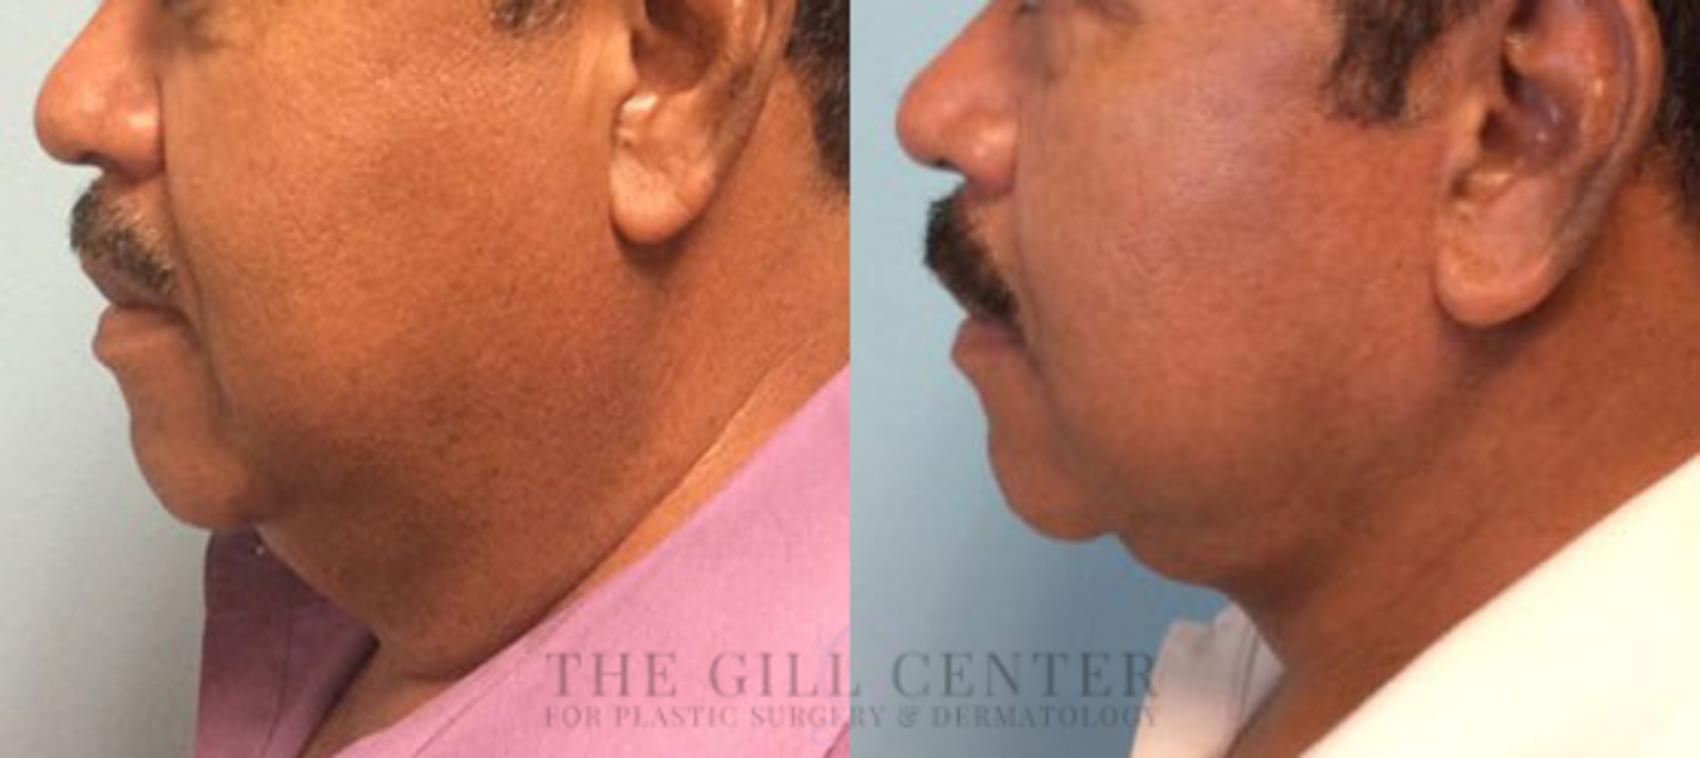 Face & Neck Lift Case 390 Before & After Left Side | The Woodlands, TX | The Gill Center for Plastic Surgery and Dermatology